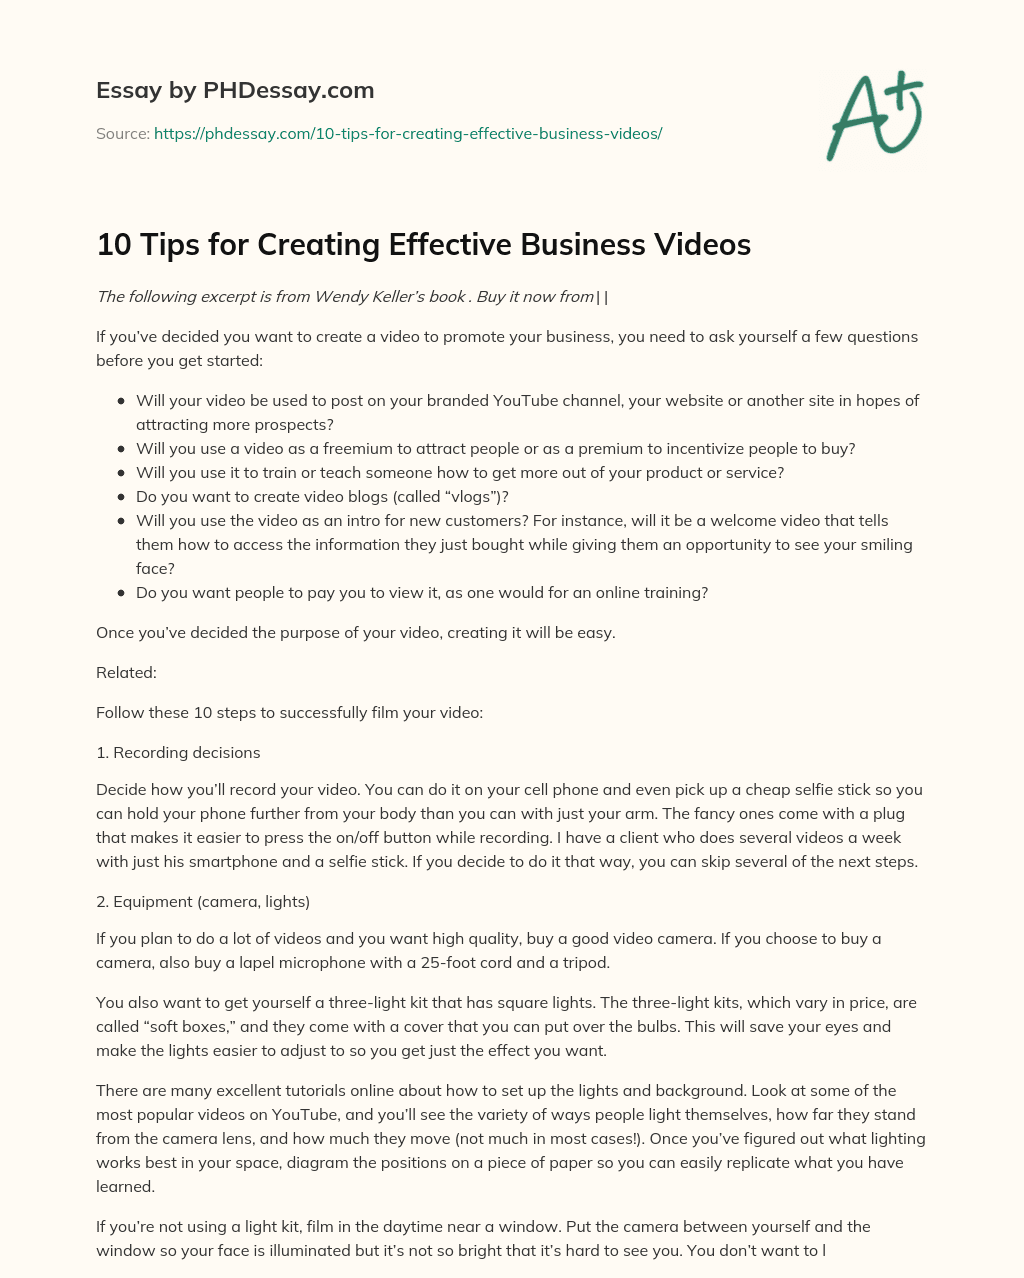 10 Tips for Creating Effective Business Videos essay